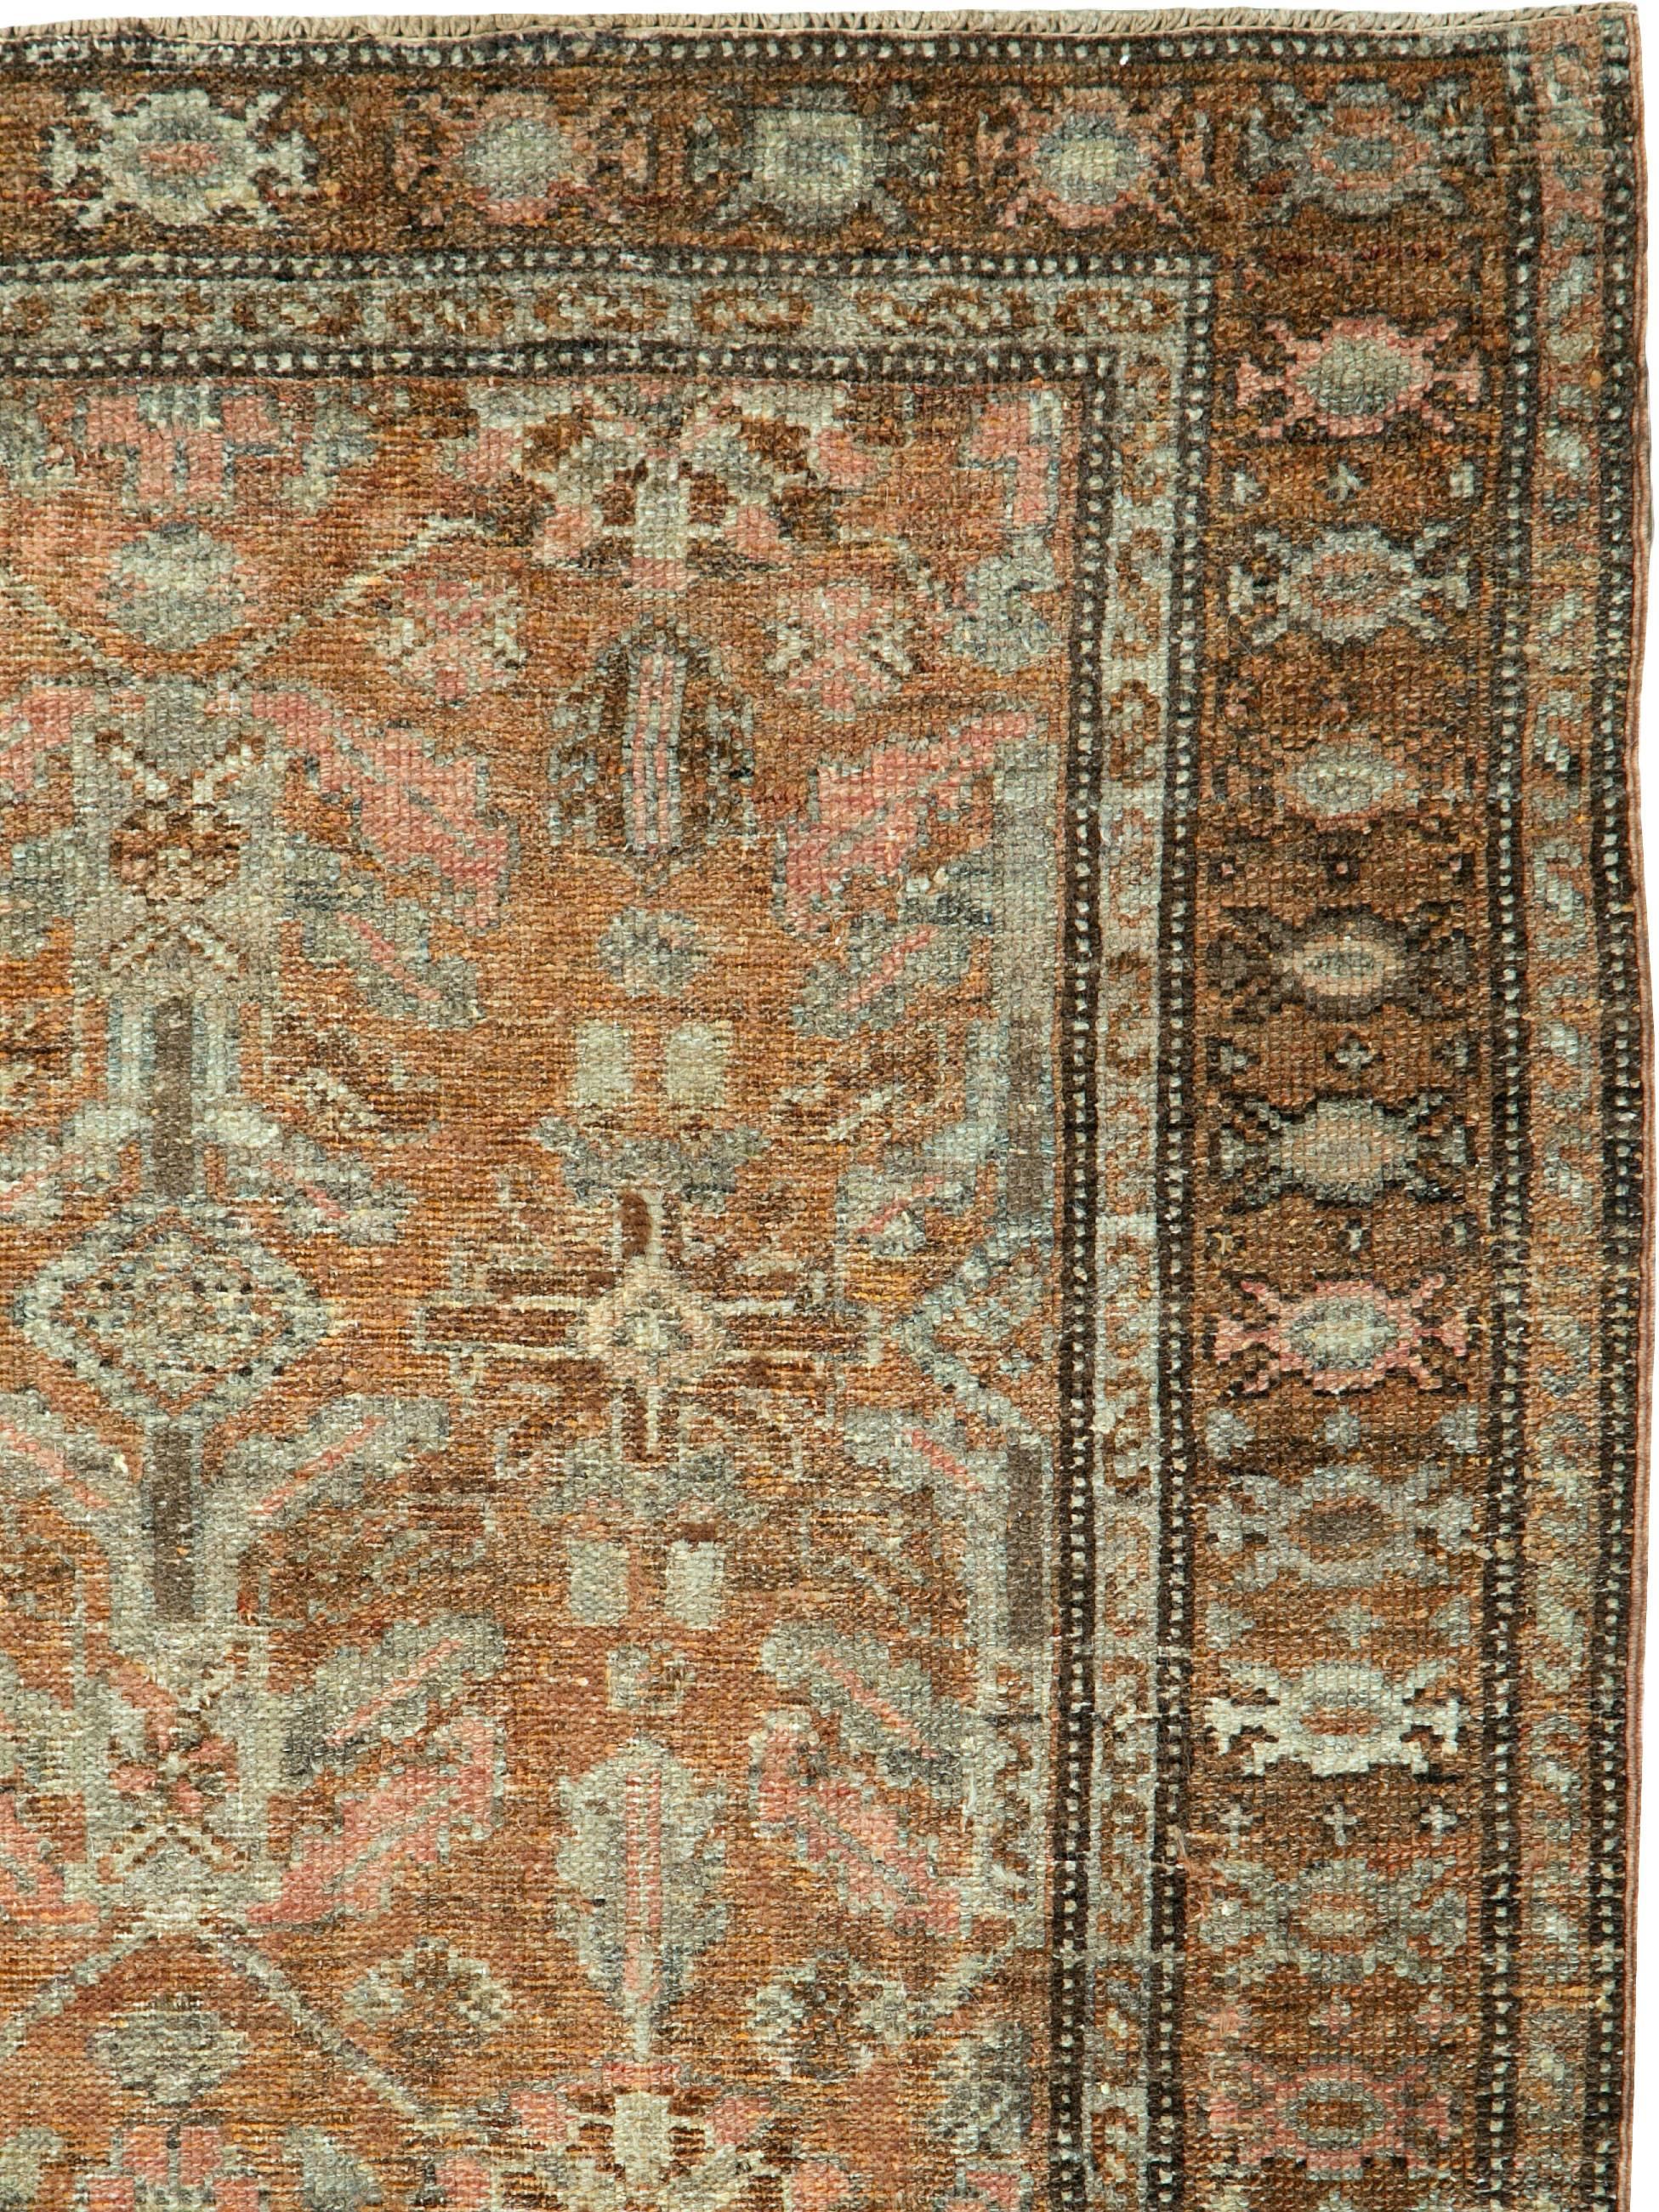 An antique Persian Malayer rug from the first quarter of the 20th century.